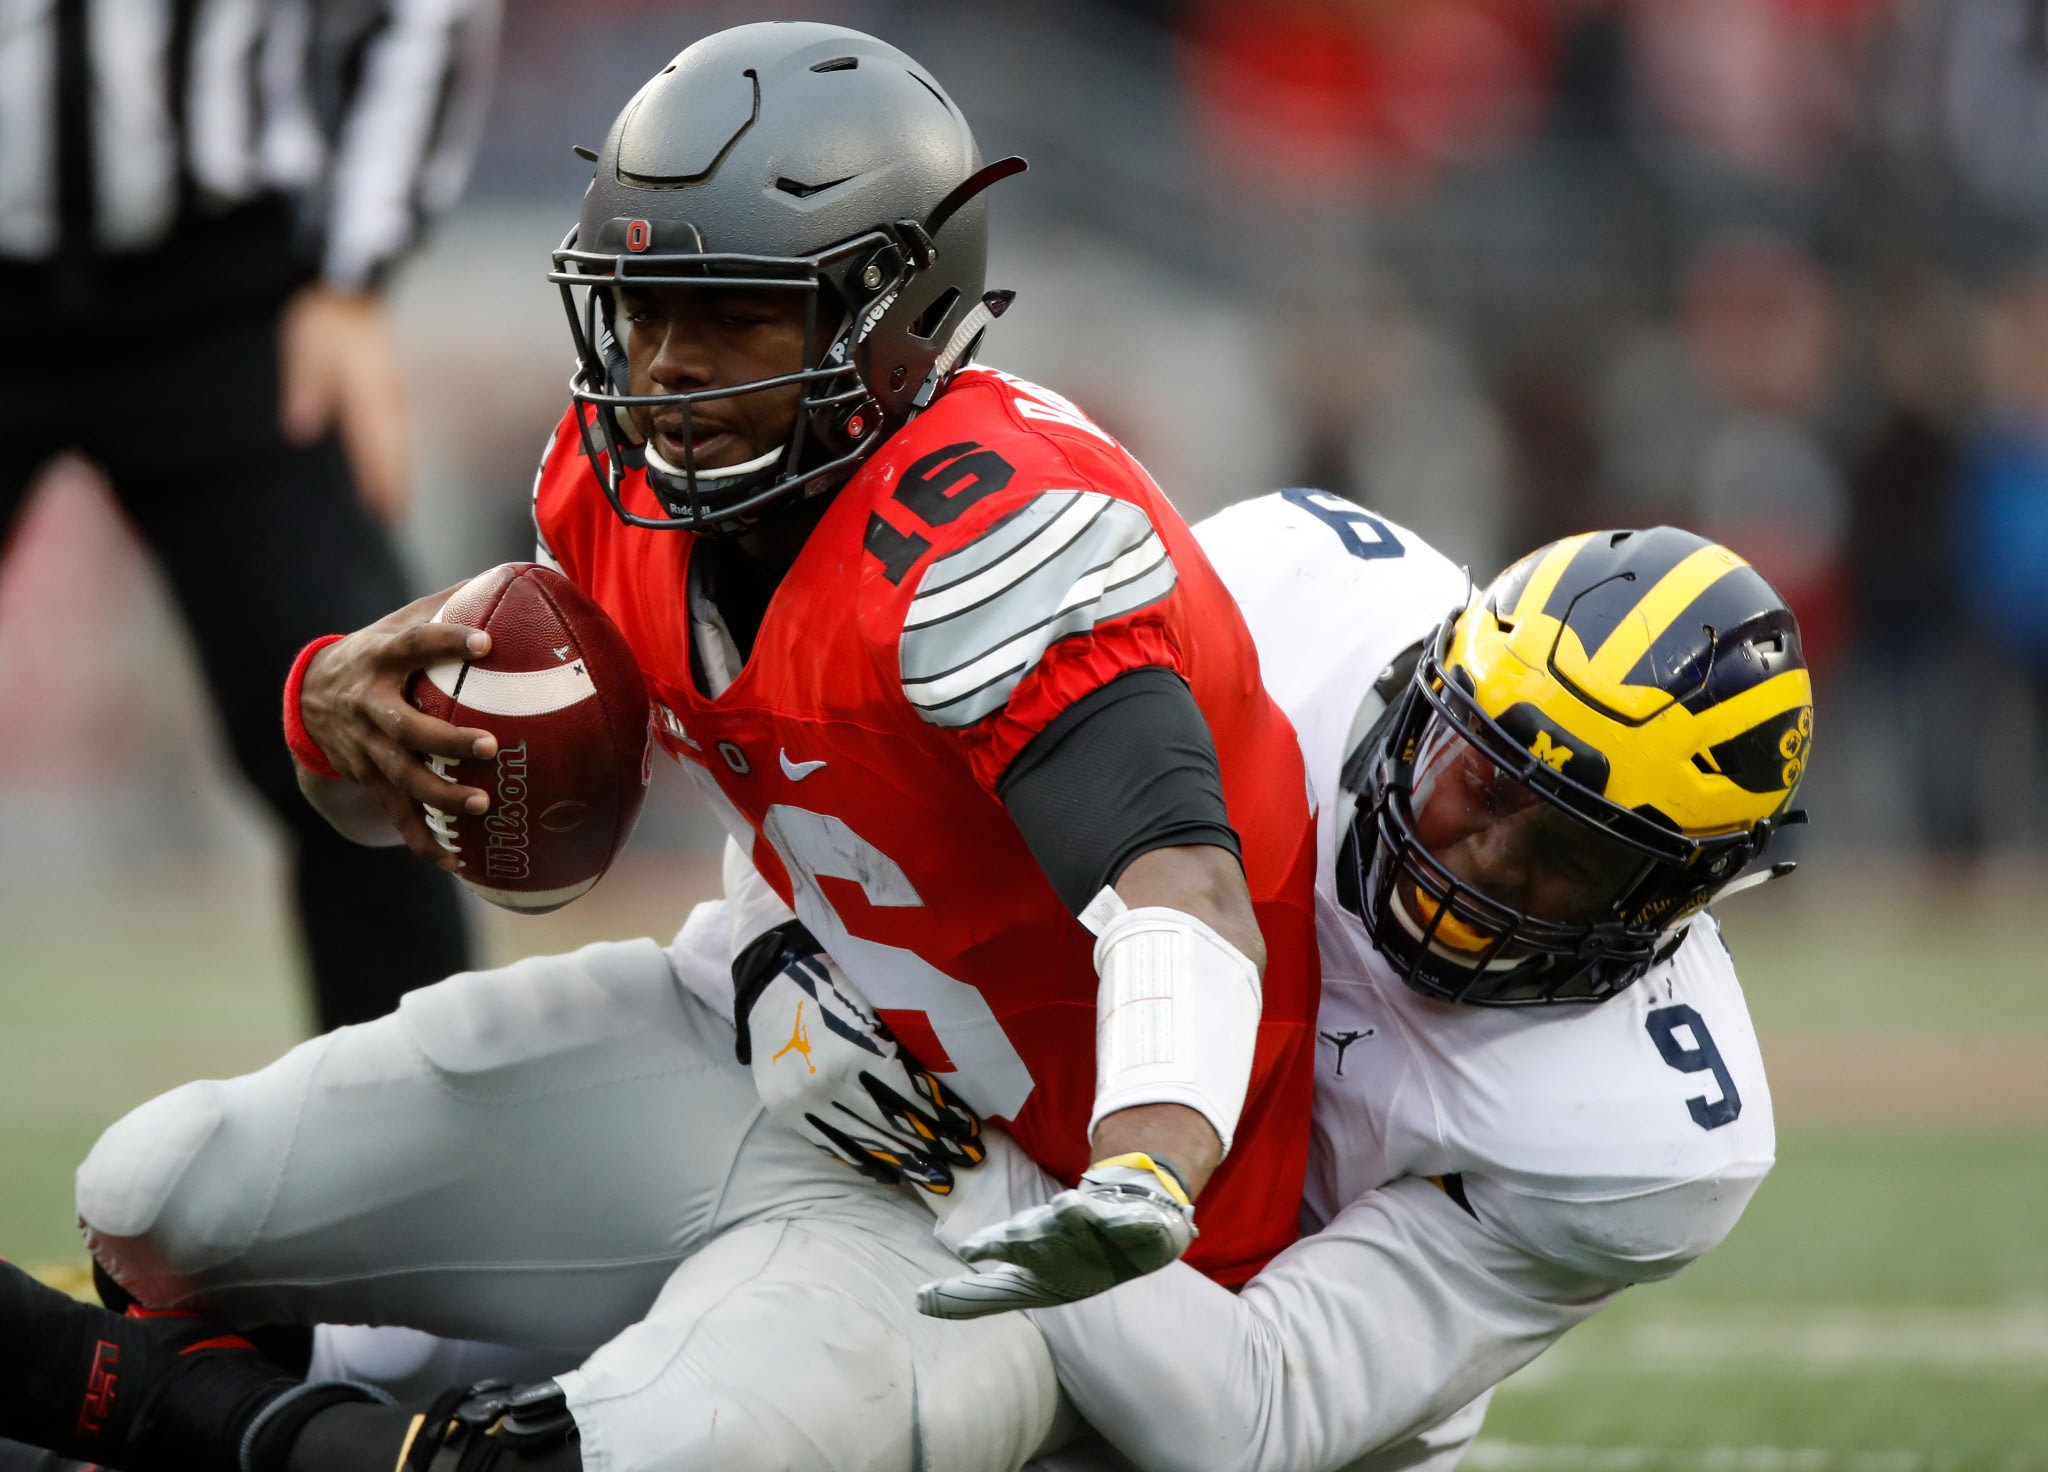 Image result for No. 2 Ohio State beats No. 3 Michigan 30-27 in double overtime